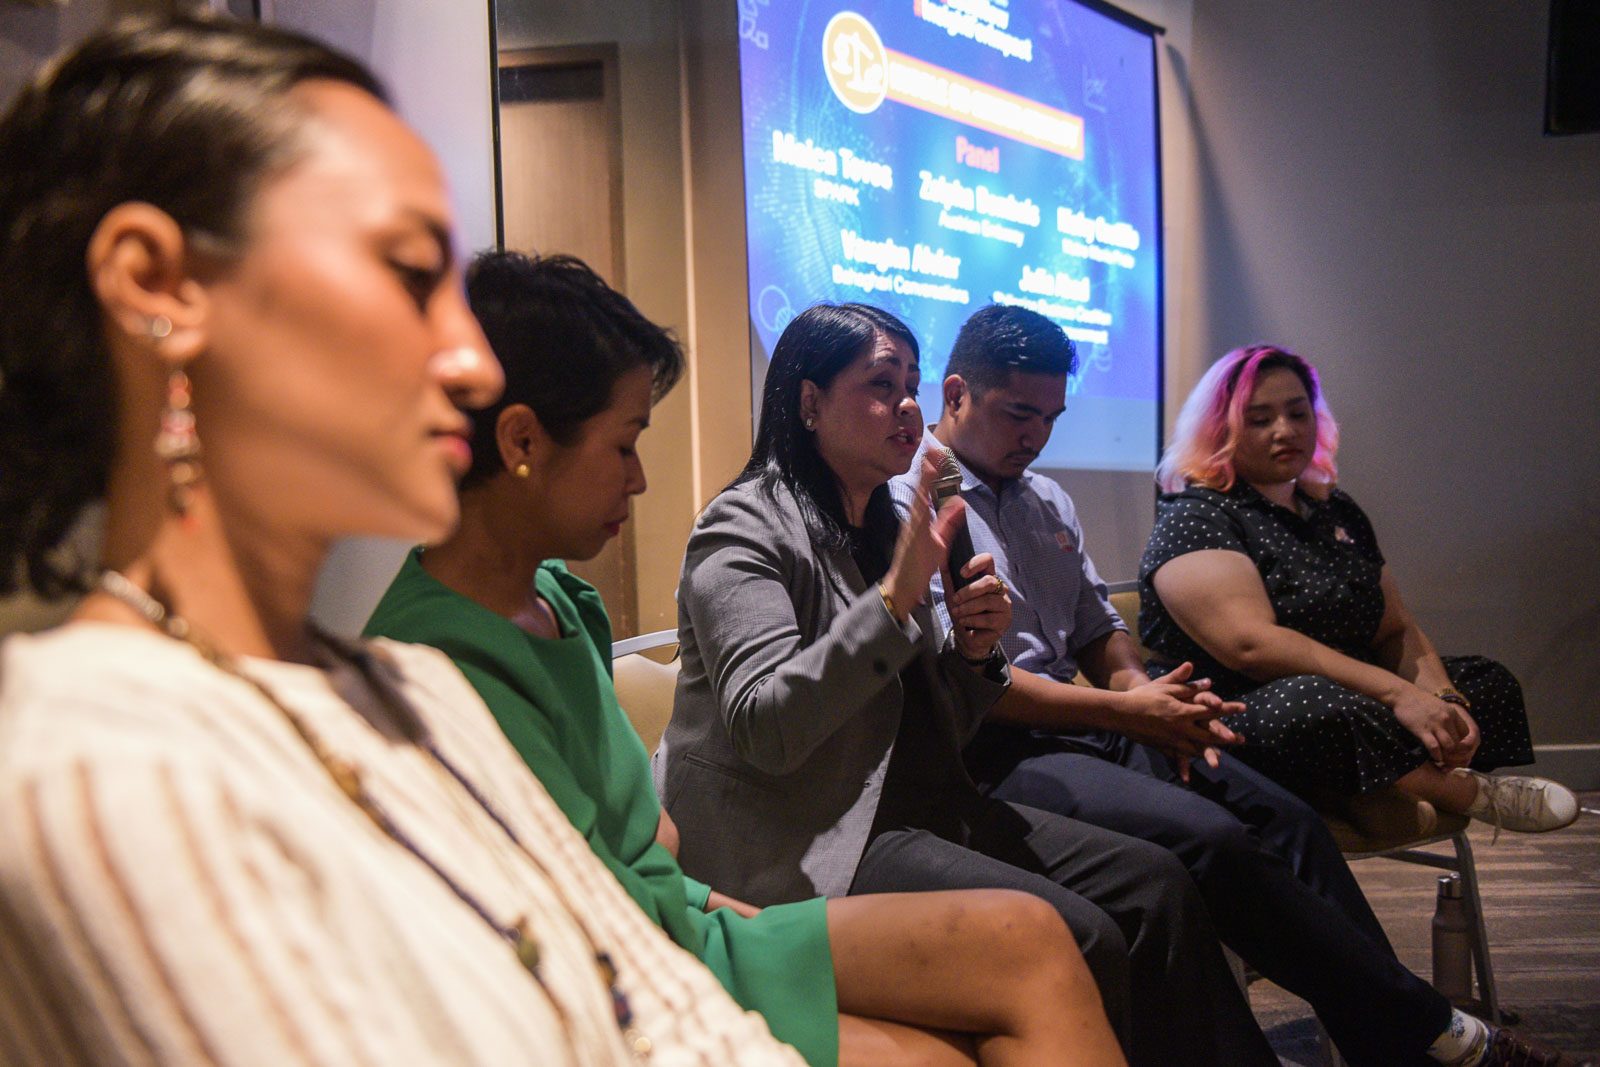 #2030NOW: Advocates rethink gender and development in the Philippines